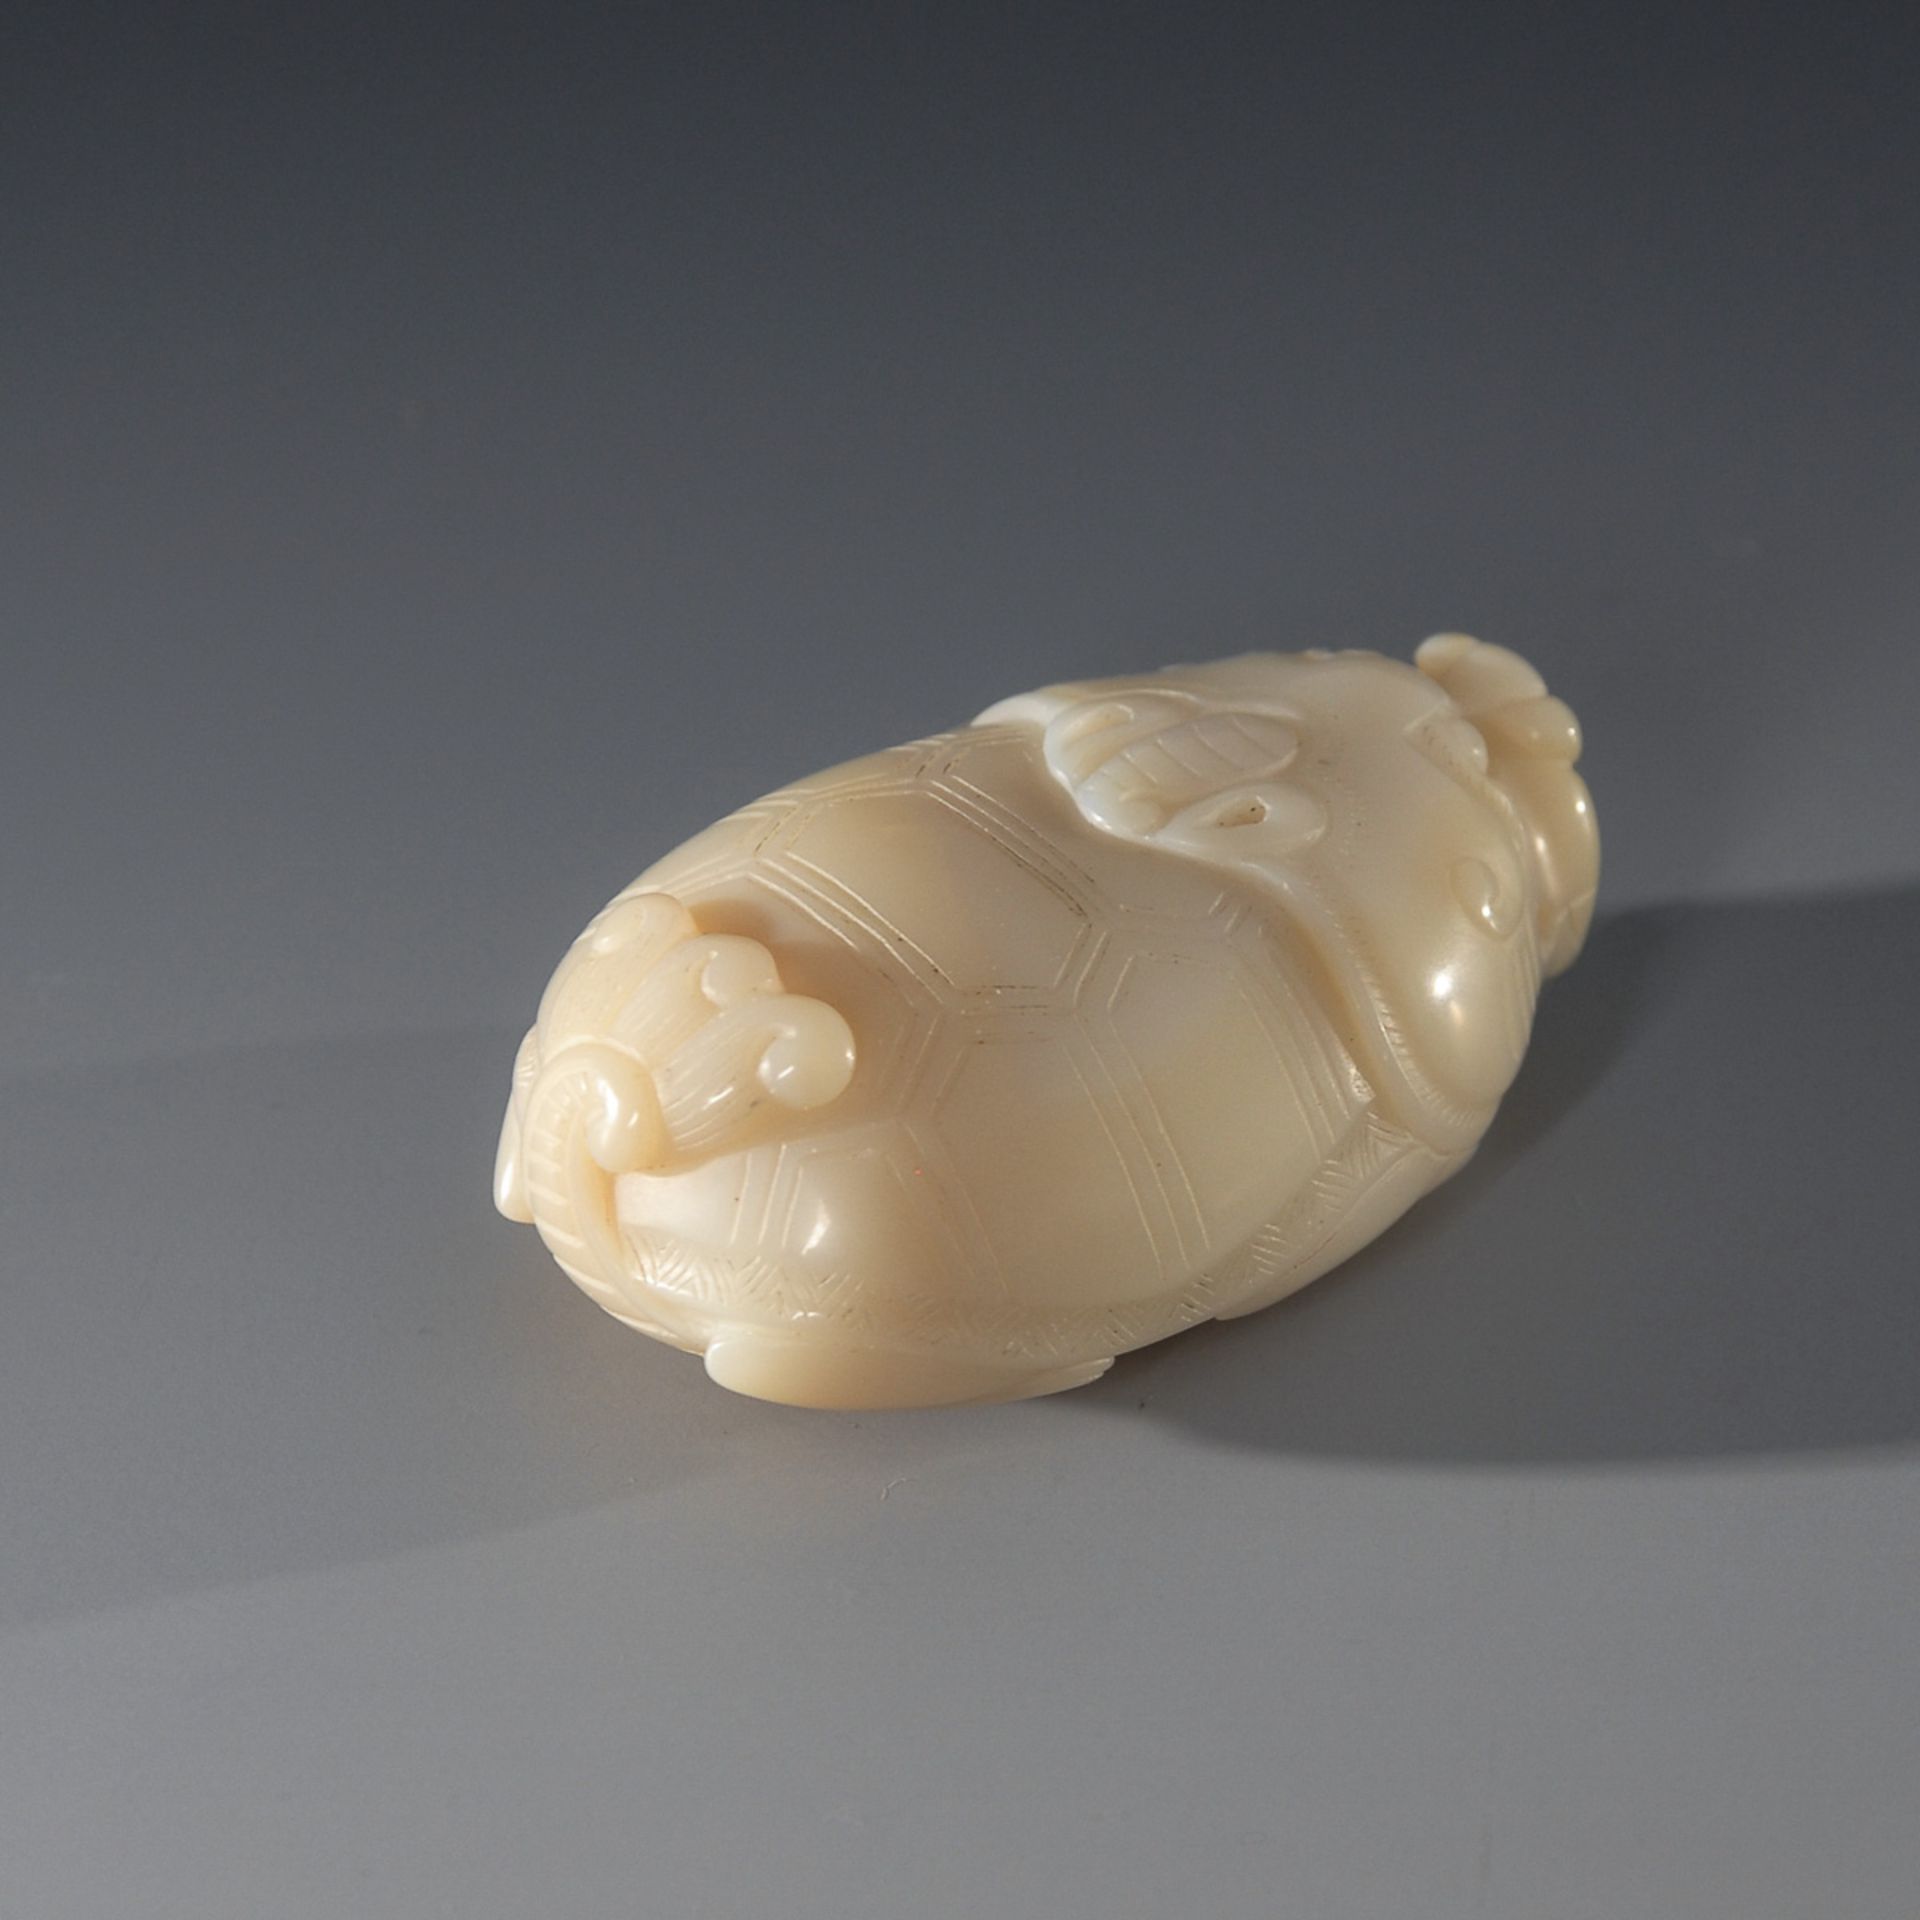 Snuffbottle - Schildkröte, weiße Jade.A Qing Dynasty White Jade Snuffbottle in the Shape of a - Image 4 of 4